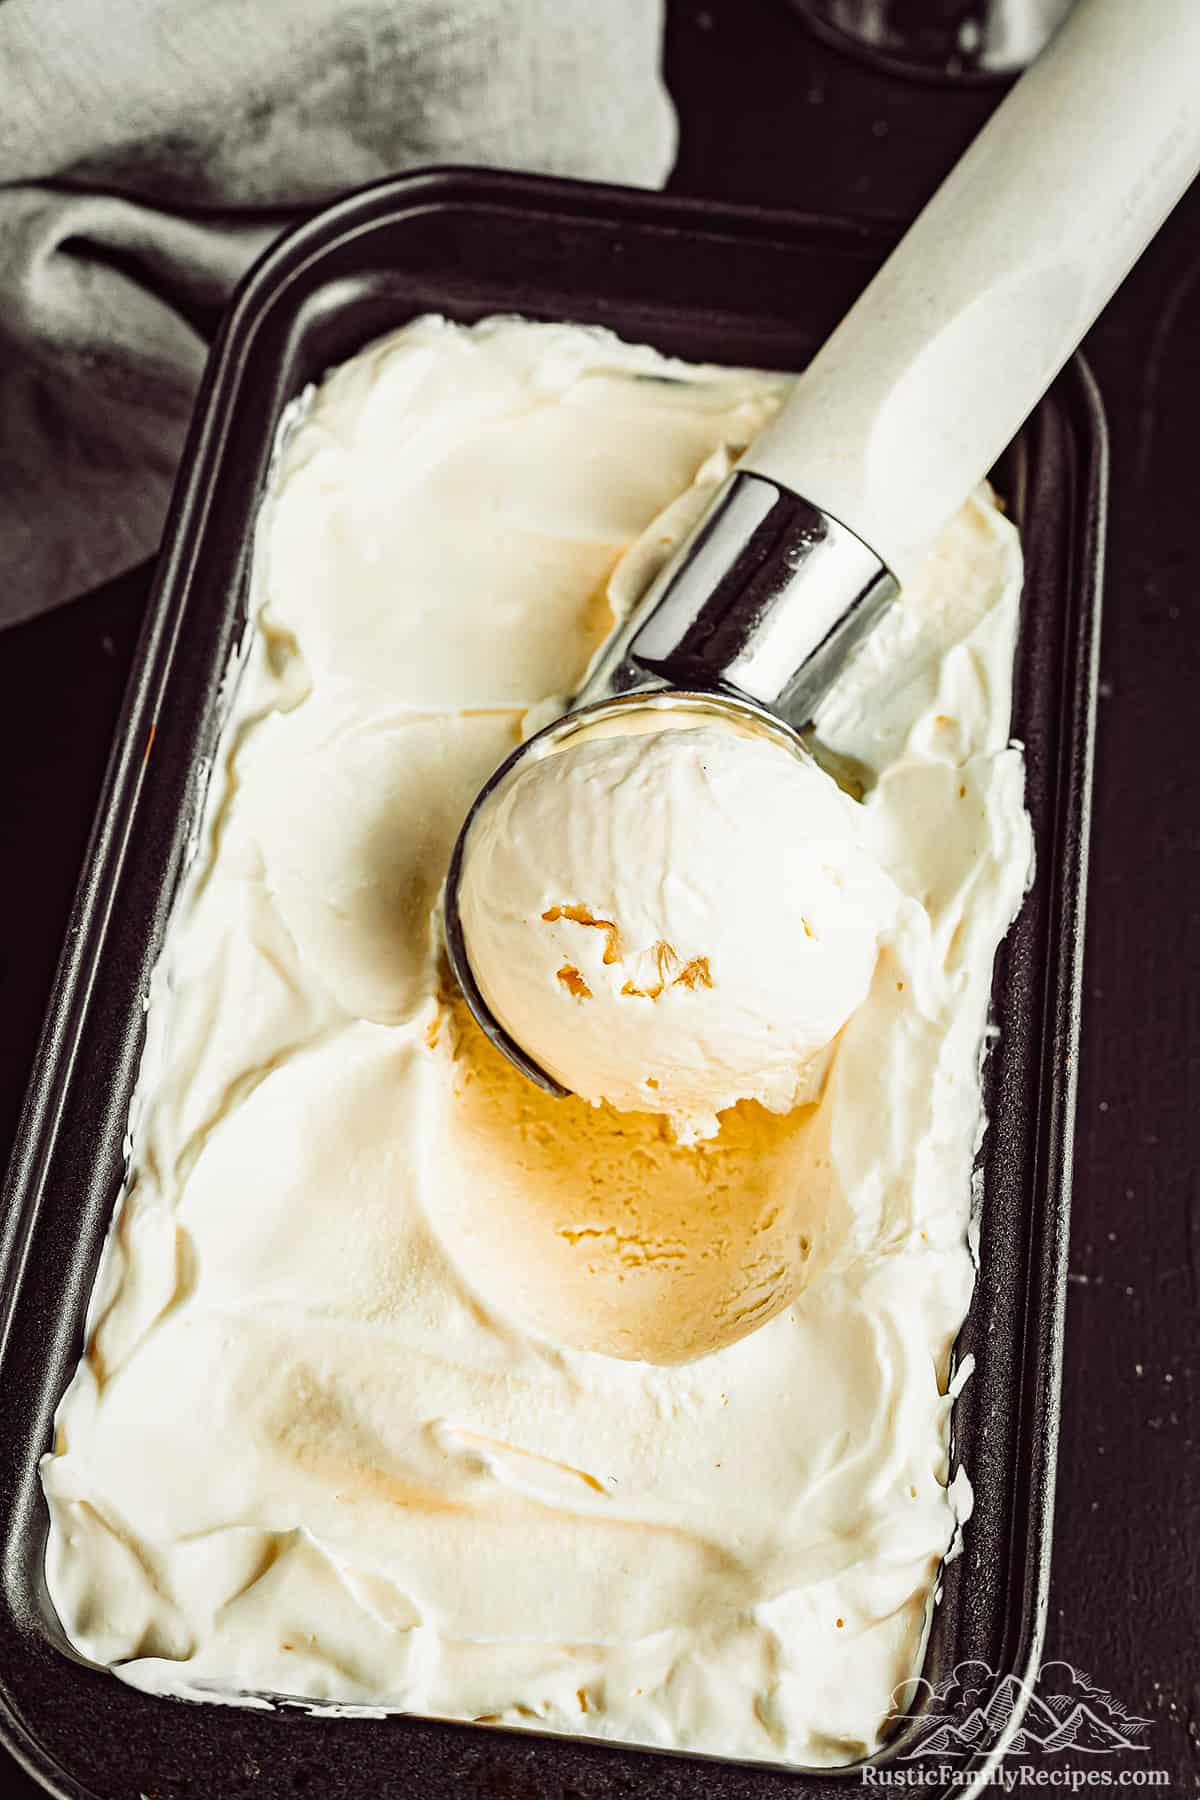 An ice cream scoop scoops an ice cream ball from a loaf pan filled with homemade bourbon vanilla ice cream.